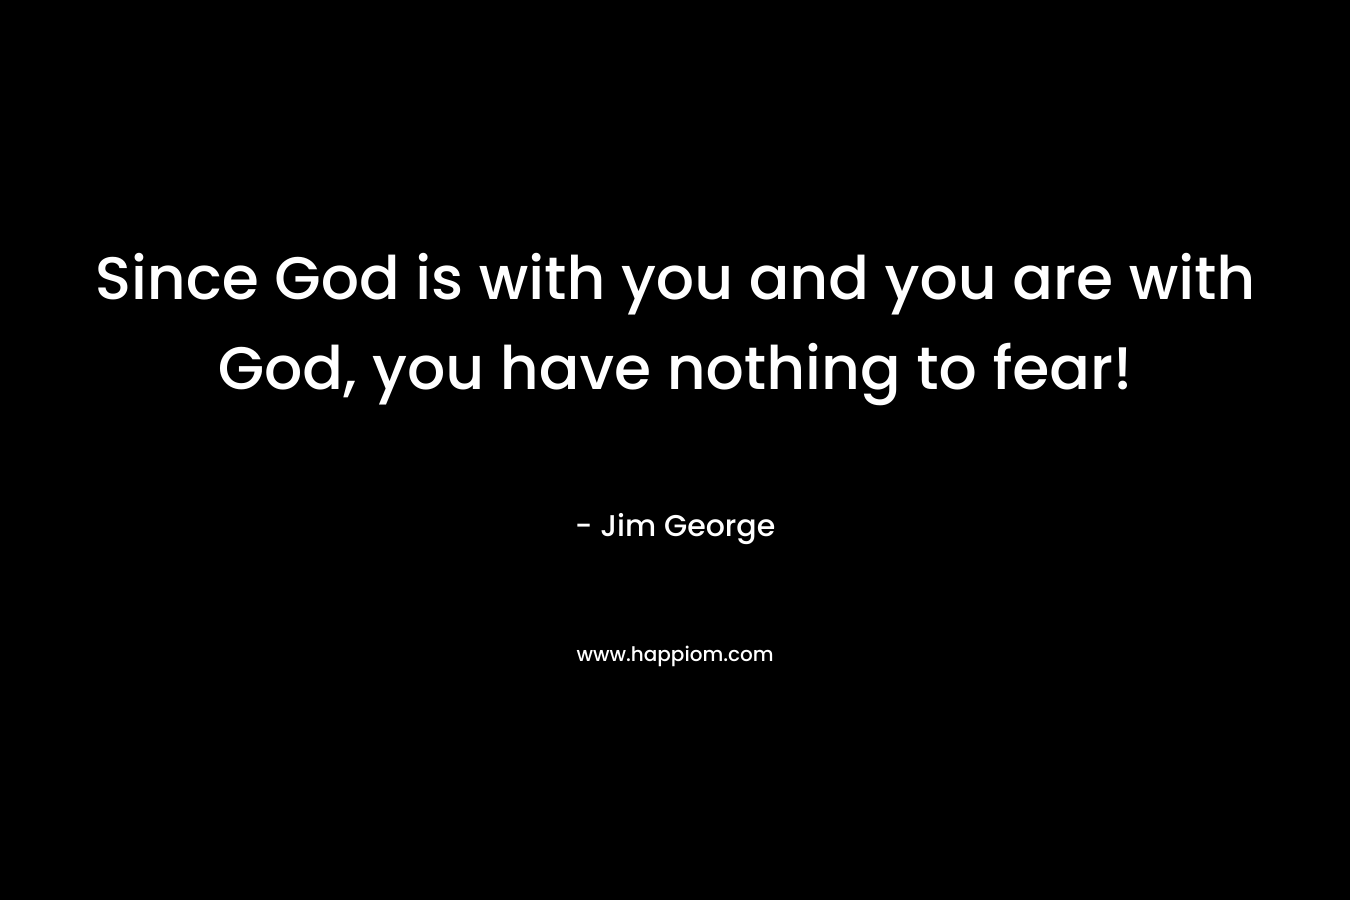 Since God is with you and you are with God, you have nothing to fear!